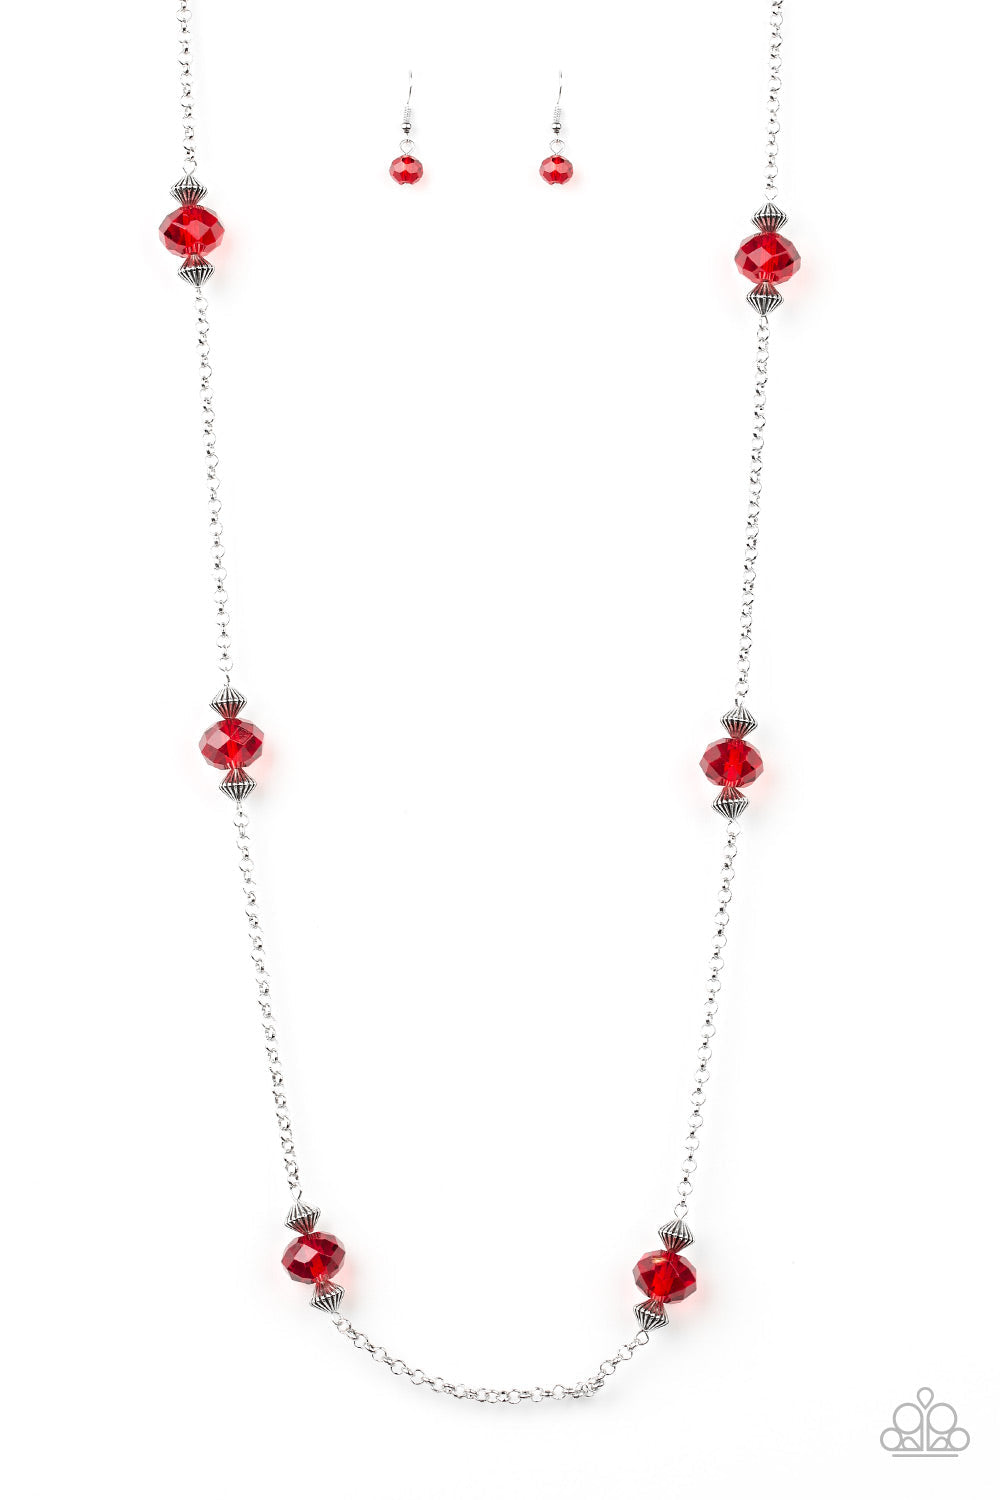 Season of Sparkle - Red and Silver Necklace - Paparazzi Accessories - Glassy red gems and silver beads trickle along a glistening silver chain for a refined stylish look. Features an adjustable clasp closure fashion necklace. 